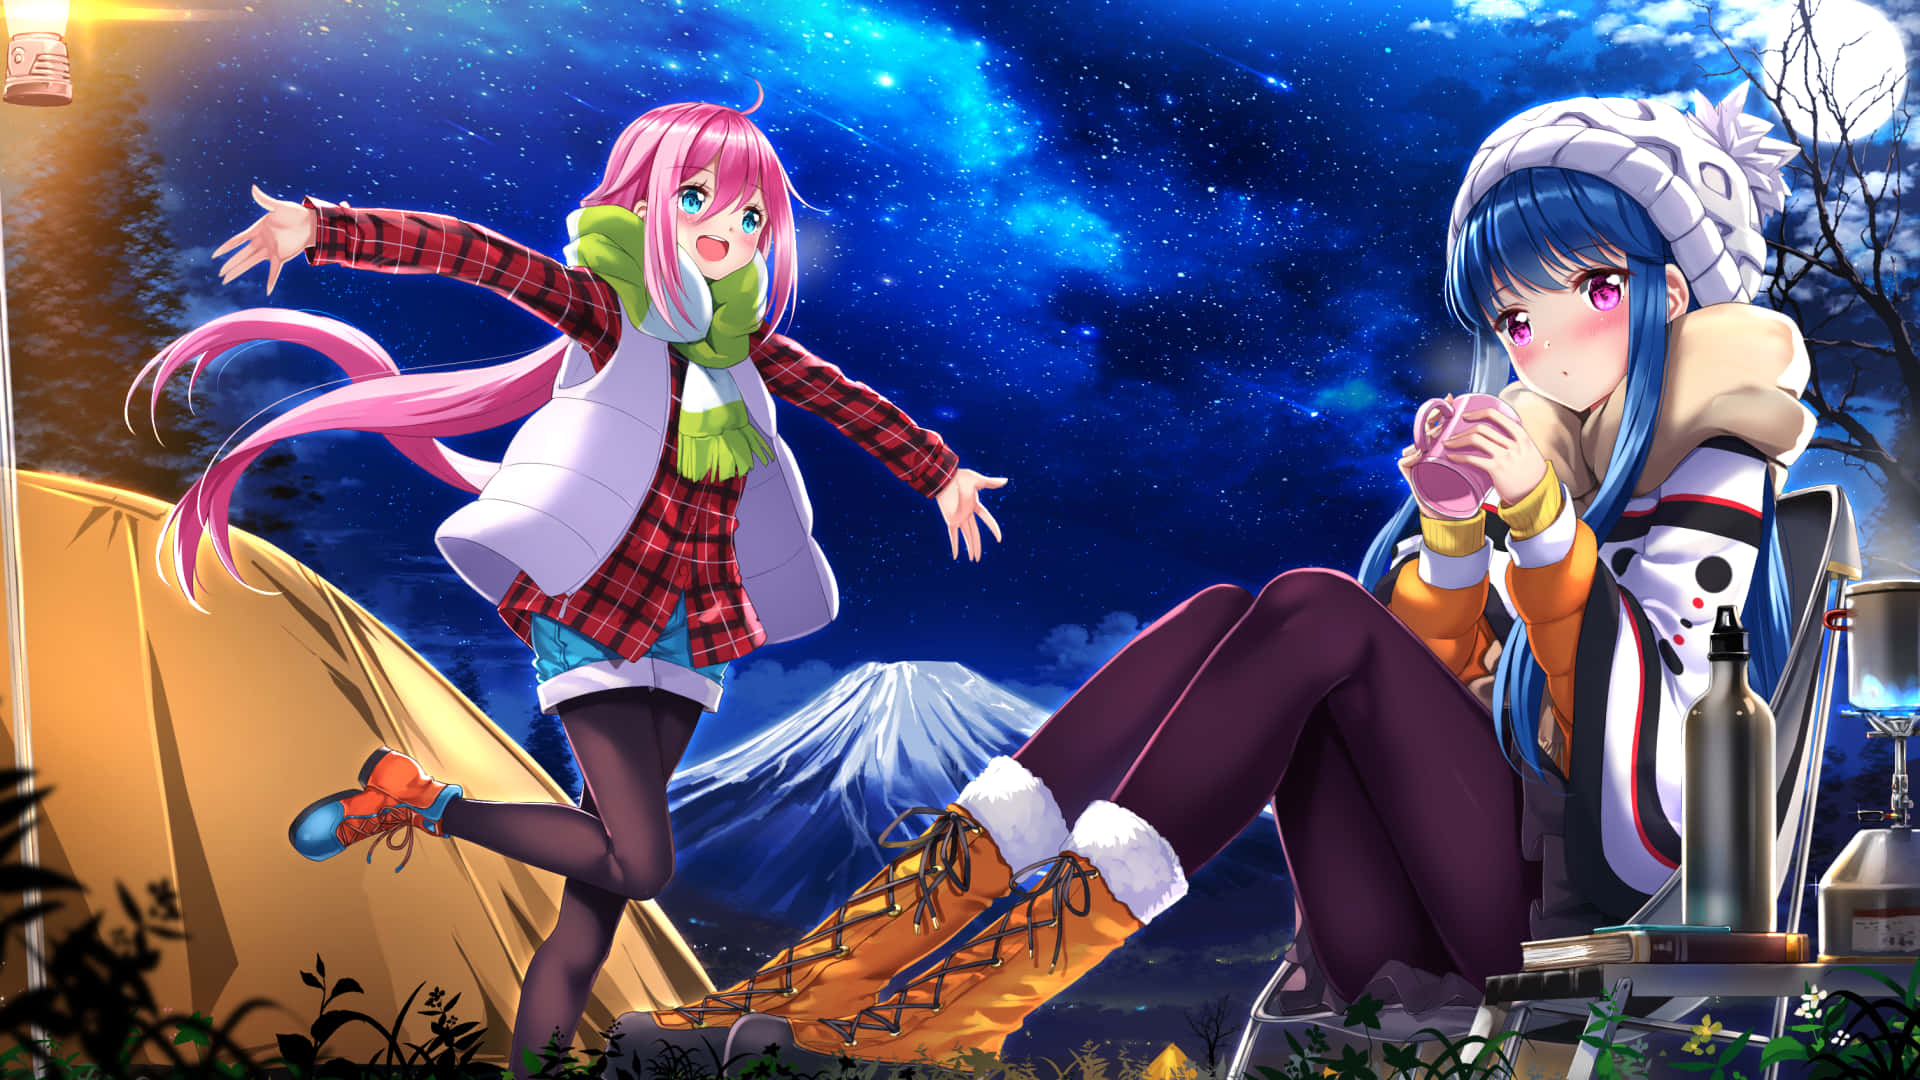 Enjoy a peaceful camping experience with the characters of Laid Back Camp